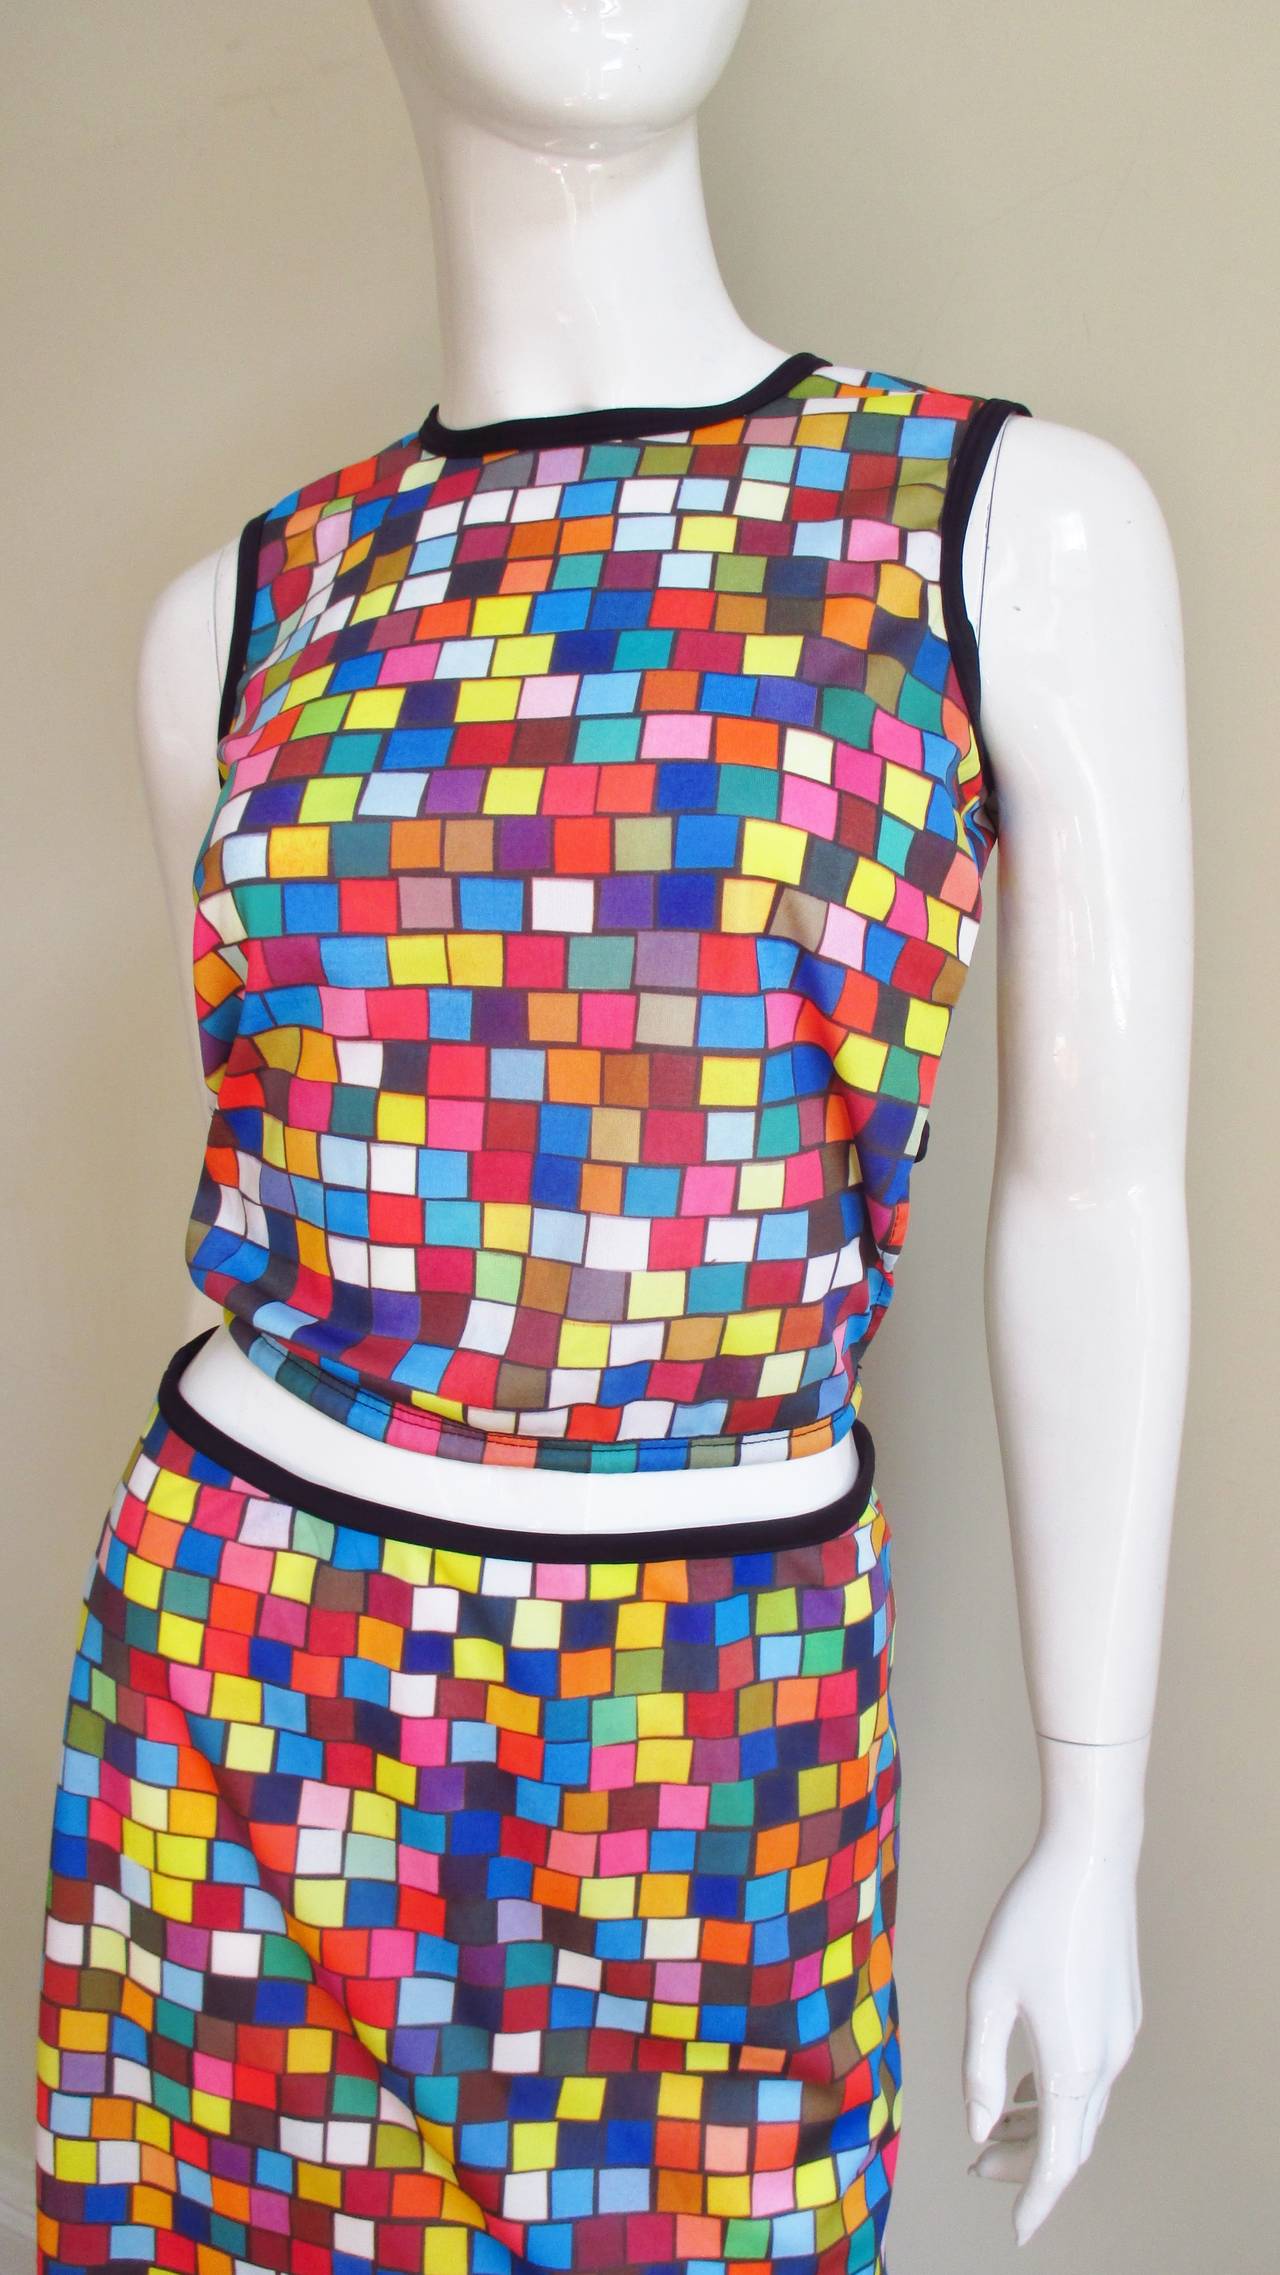 A fab 2 piece jersey set from designer Todd Oldham in a brightly colored check pattern.  It consists of a midriff top with a cutout tie back and a functional drawstring front hem and a mini A line skirt.  Both slip on and are unlined.  Neck,